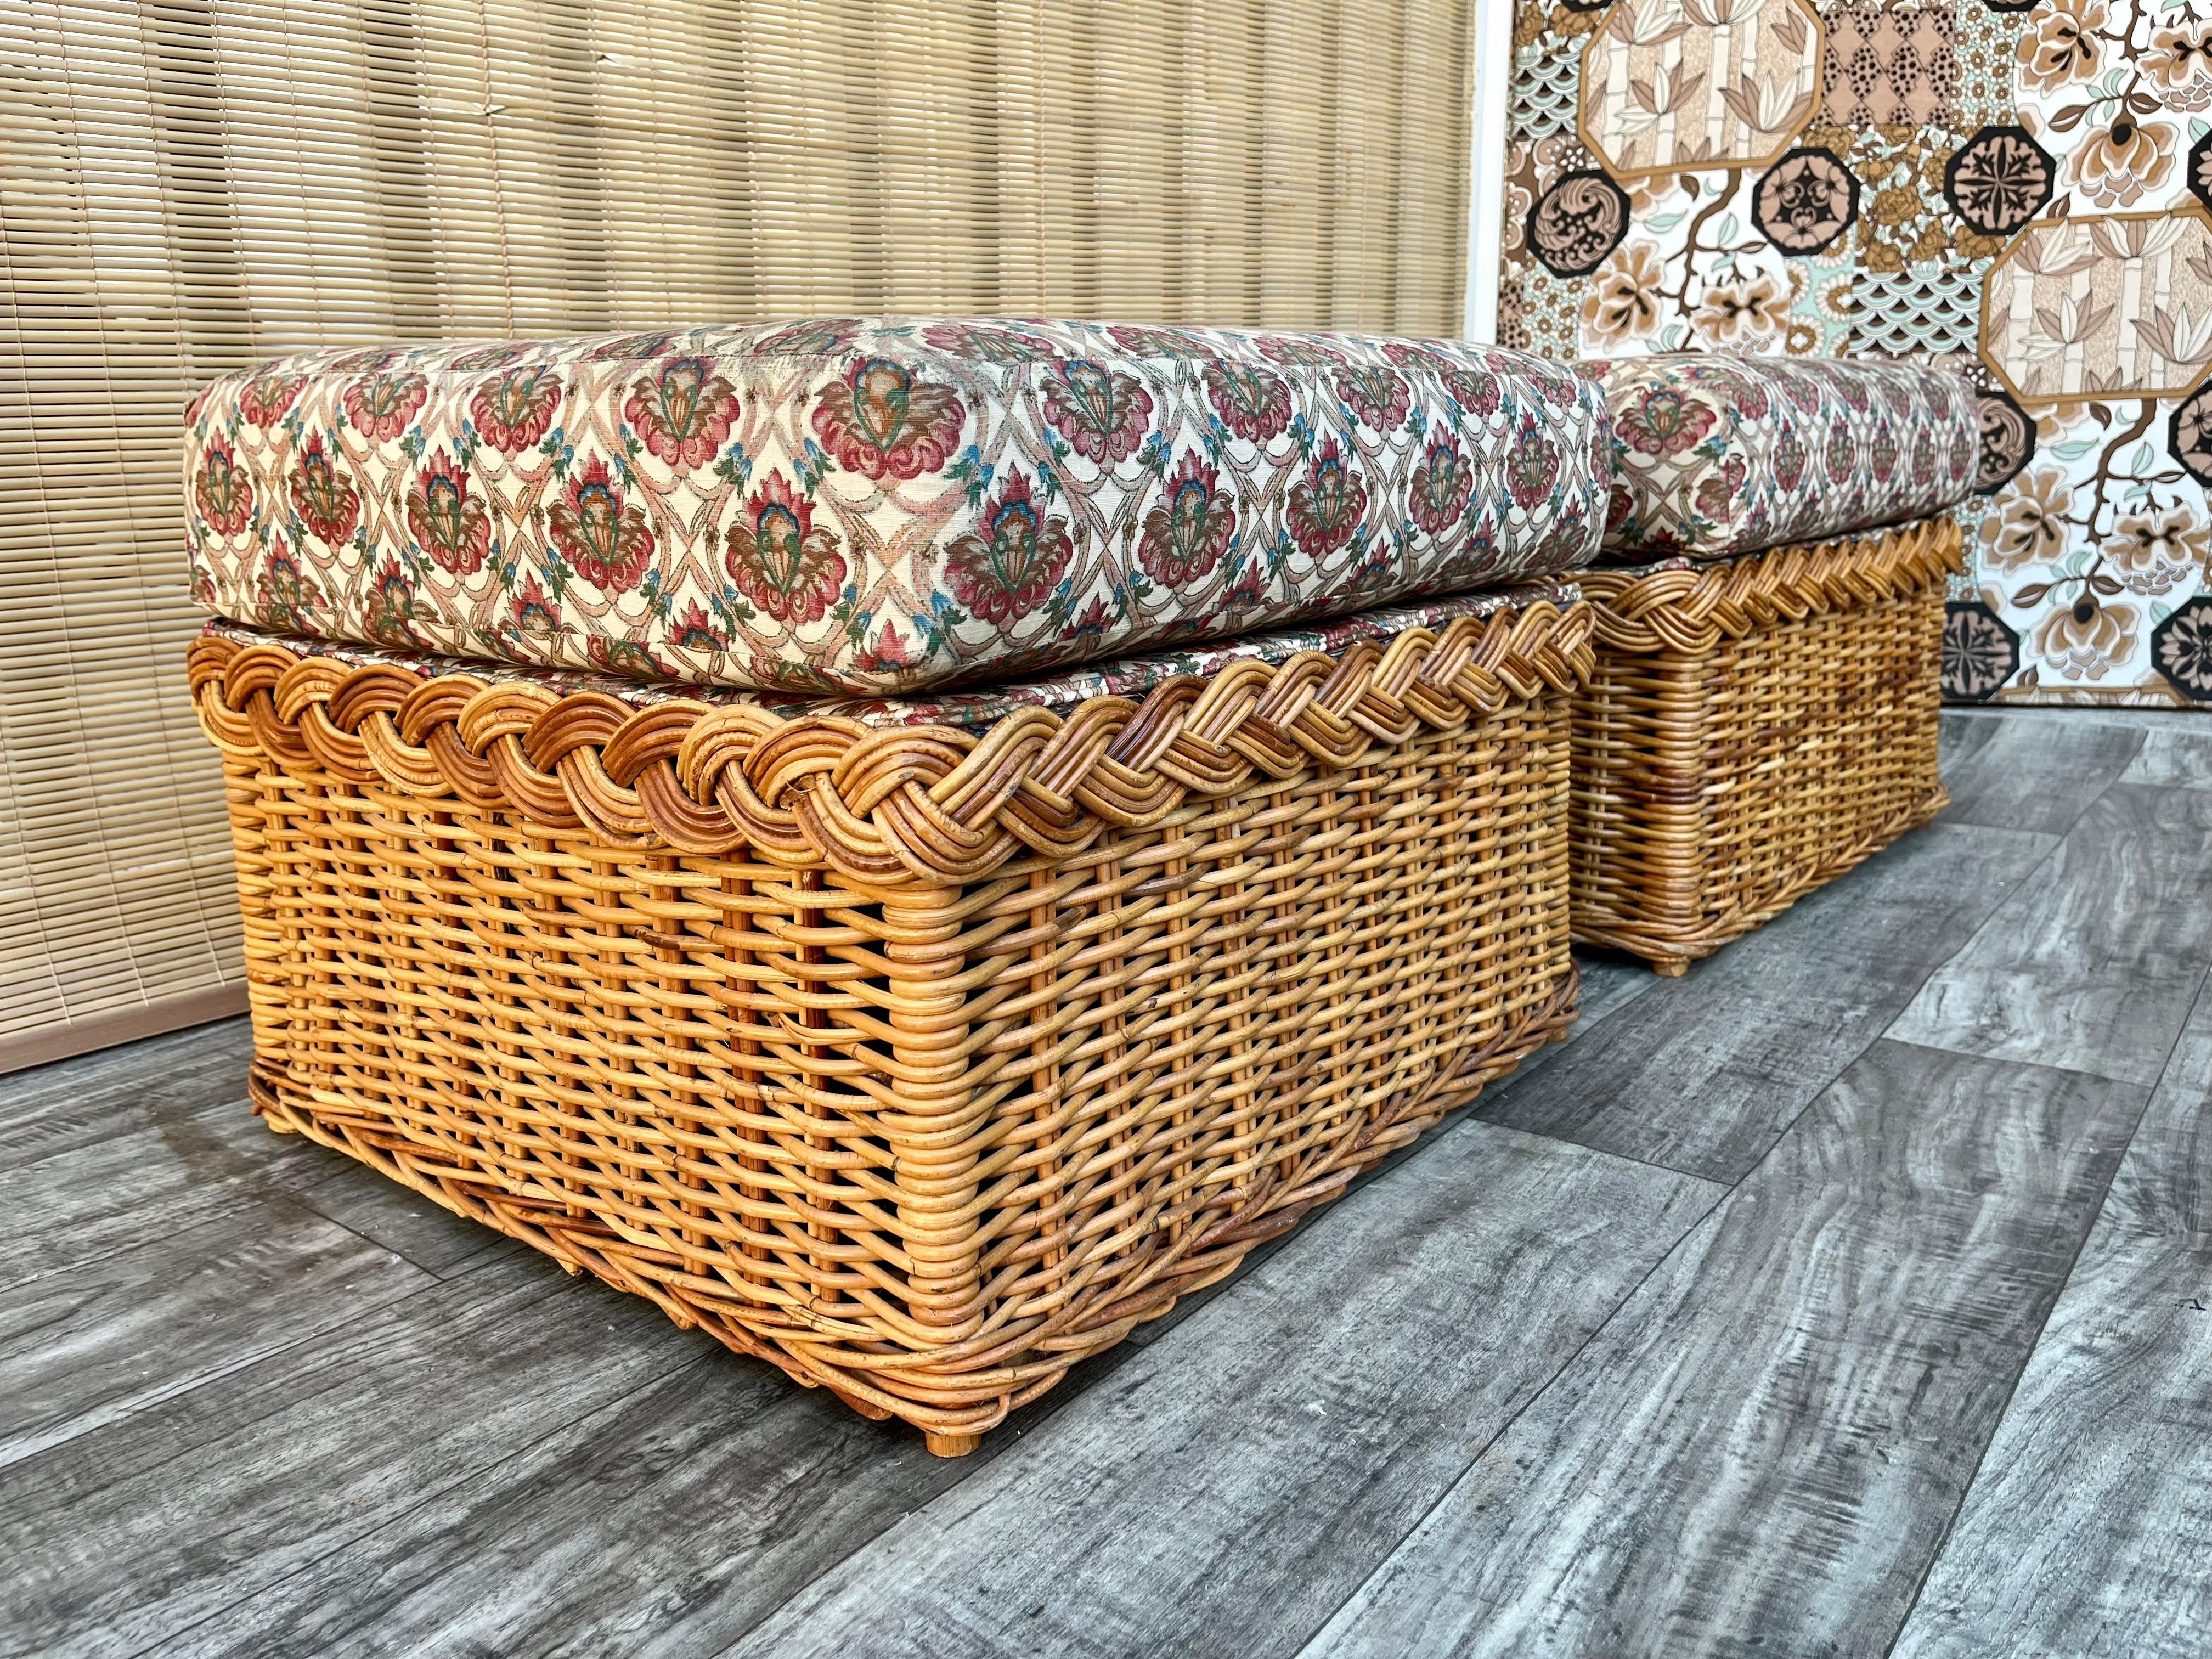 A Pair of Vintage Large Scale, Natural Wicker/Rattan Coastal Style Ottomans in the Bielecky Brothers' manner. Circa 1970s
Features a beautiful glowing honey colored weaved rattan frame with an elegant braided trim detail at top edges, with removable